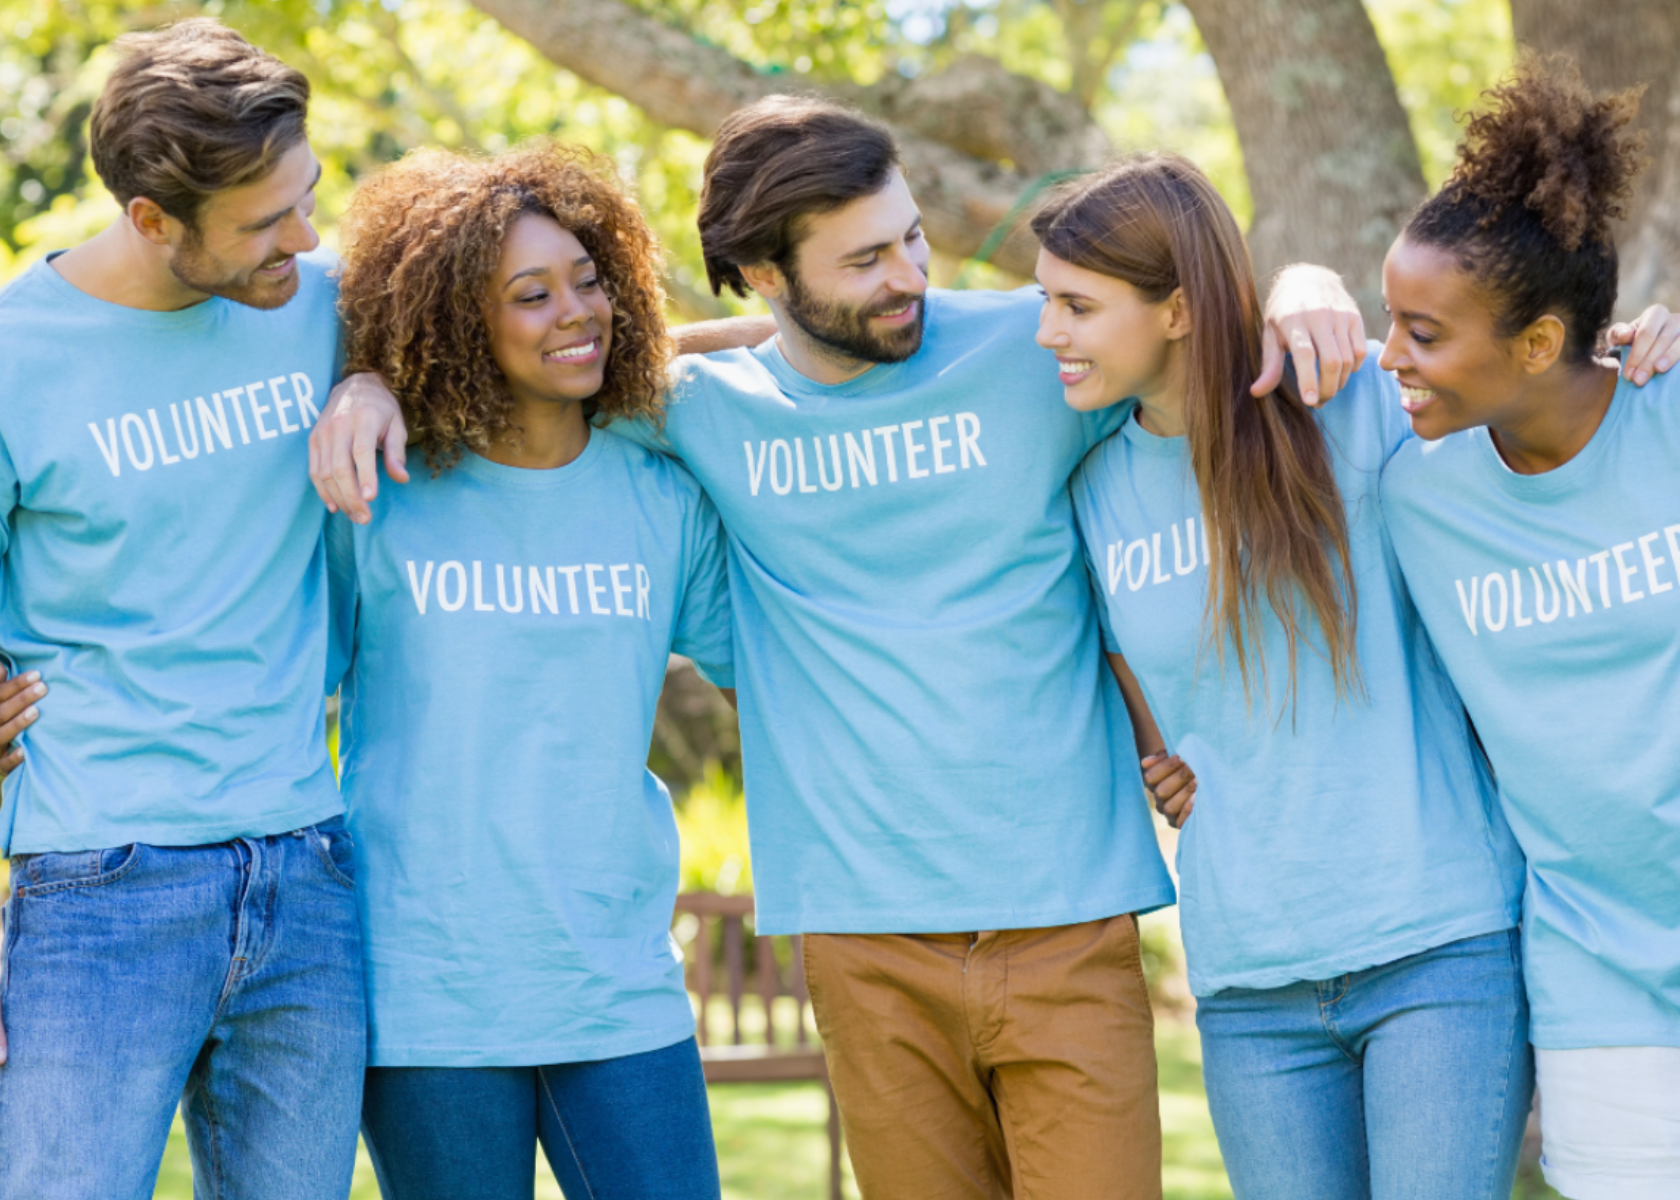 The Power of Volunteering Boosting Self-Esteem, Alleviating Loneliness, and Unlocking New Opportunities